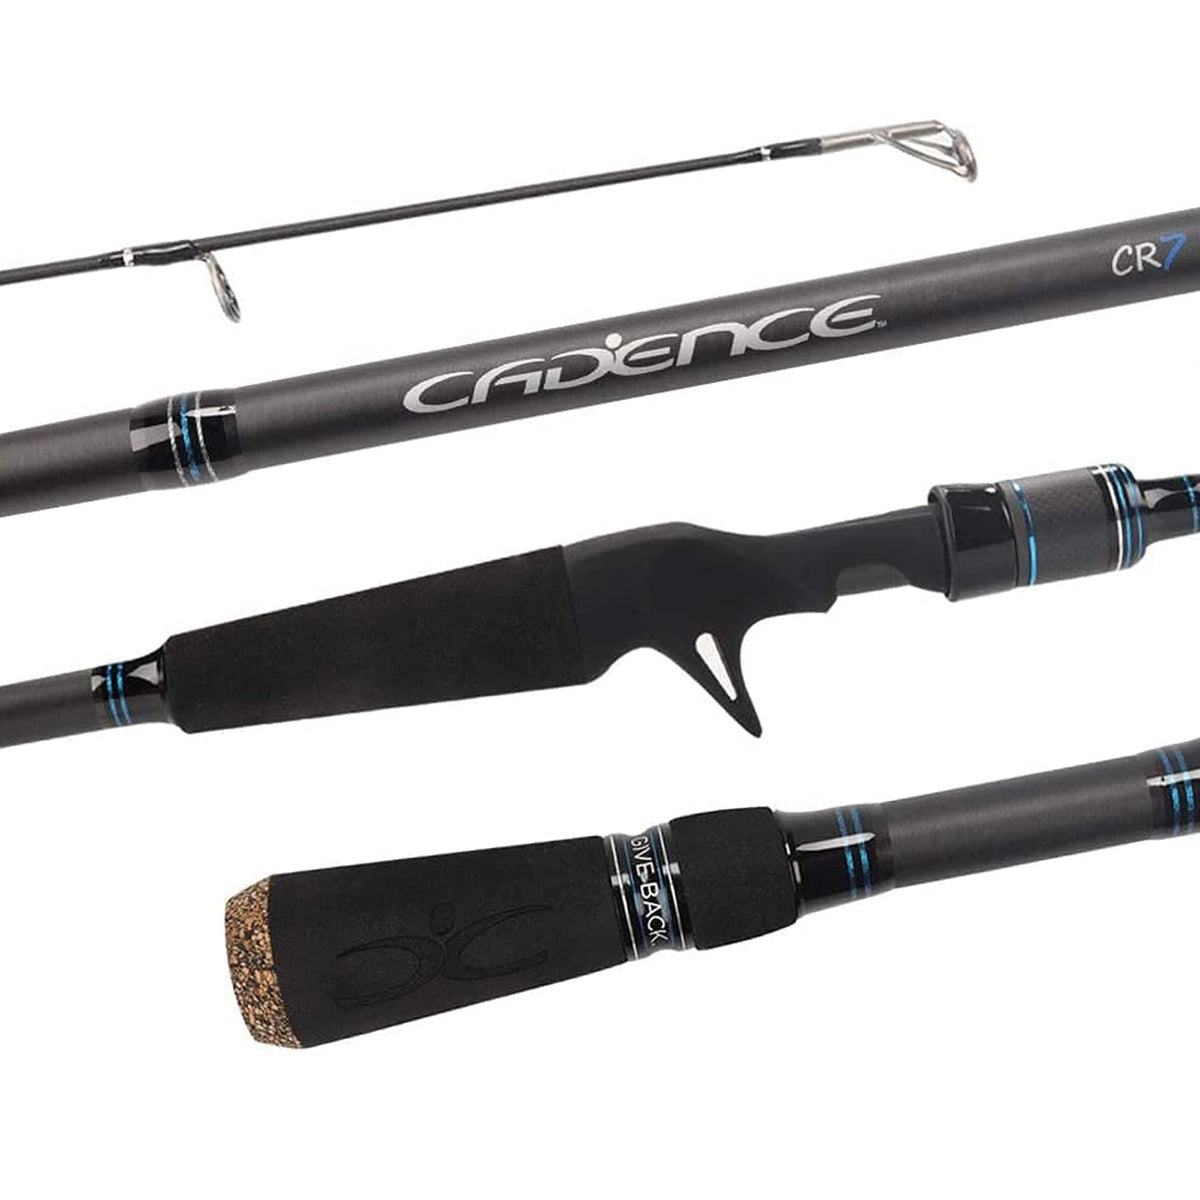 Cadence Vigor Spinning Rod, 30-Ton Carbon Blank, Fuji Reel Seat, Durable  Stainless-Steel Guides, 2-Piece Rod with Convenience & Performance,  Multiple